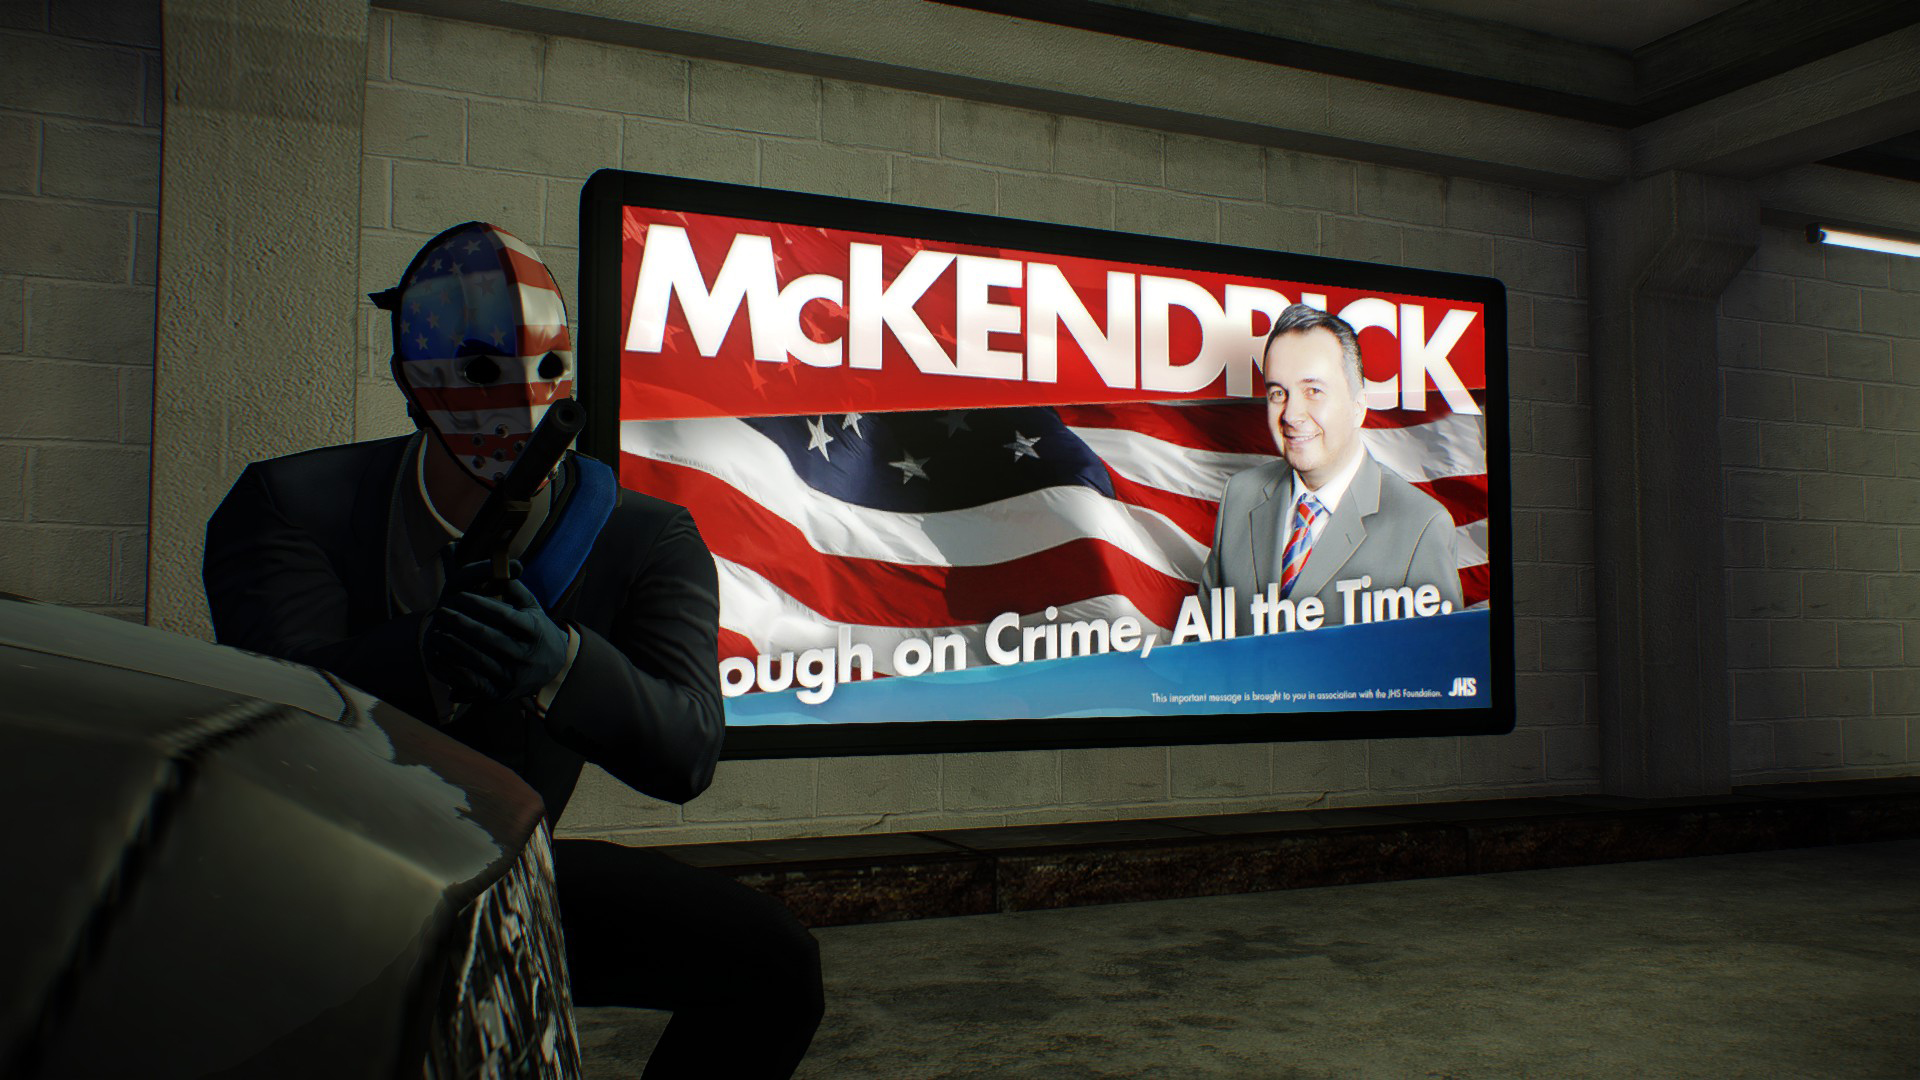 Payday 2 System Requirements: Can You Run It?